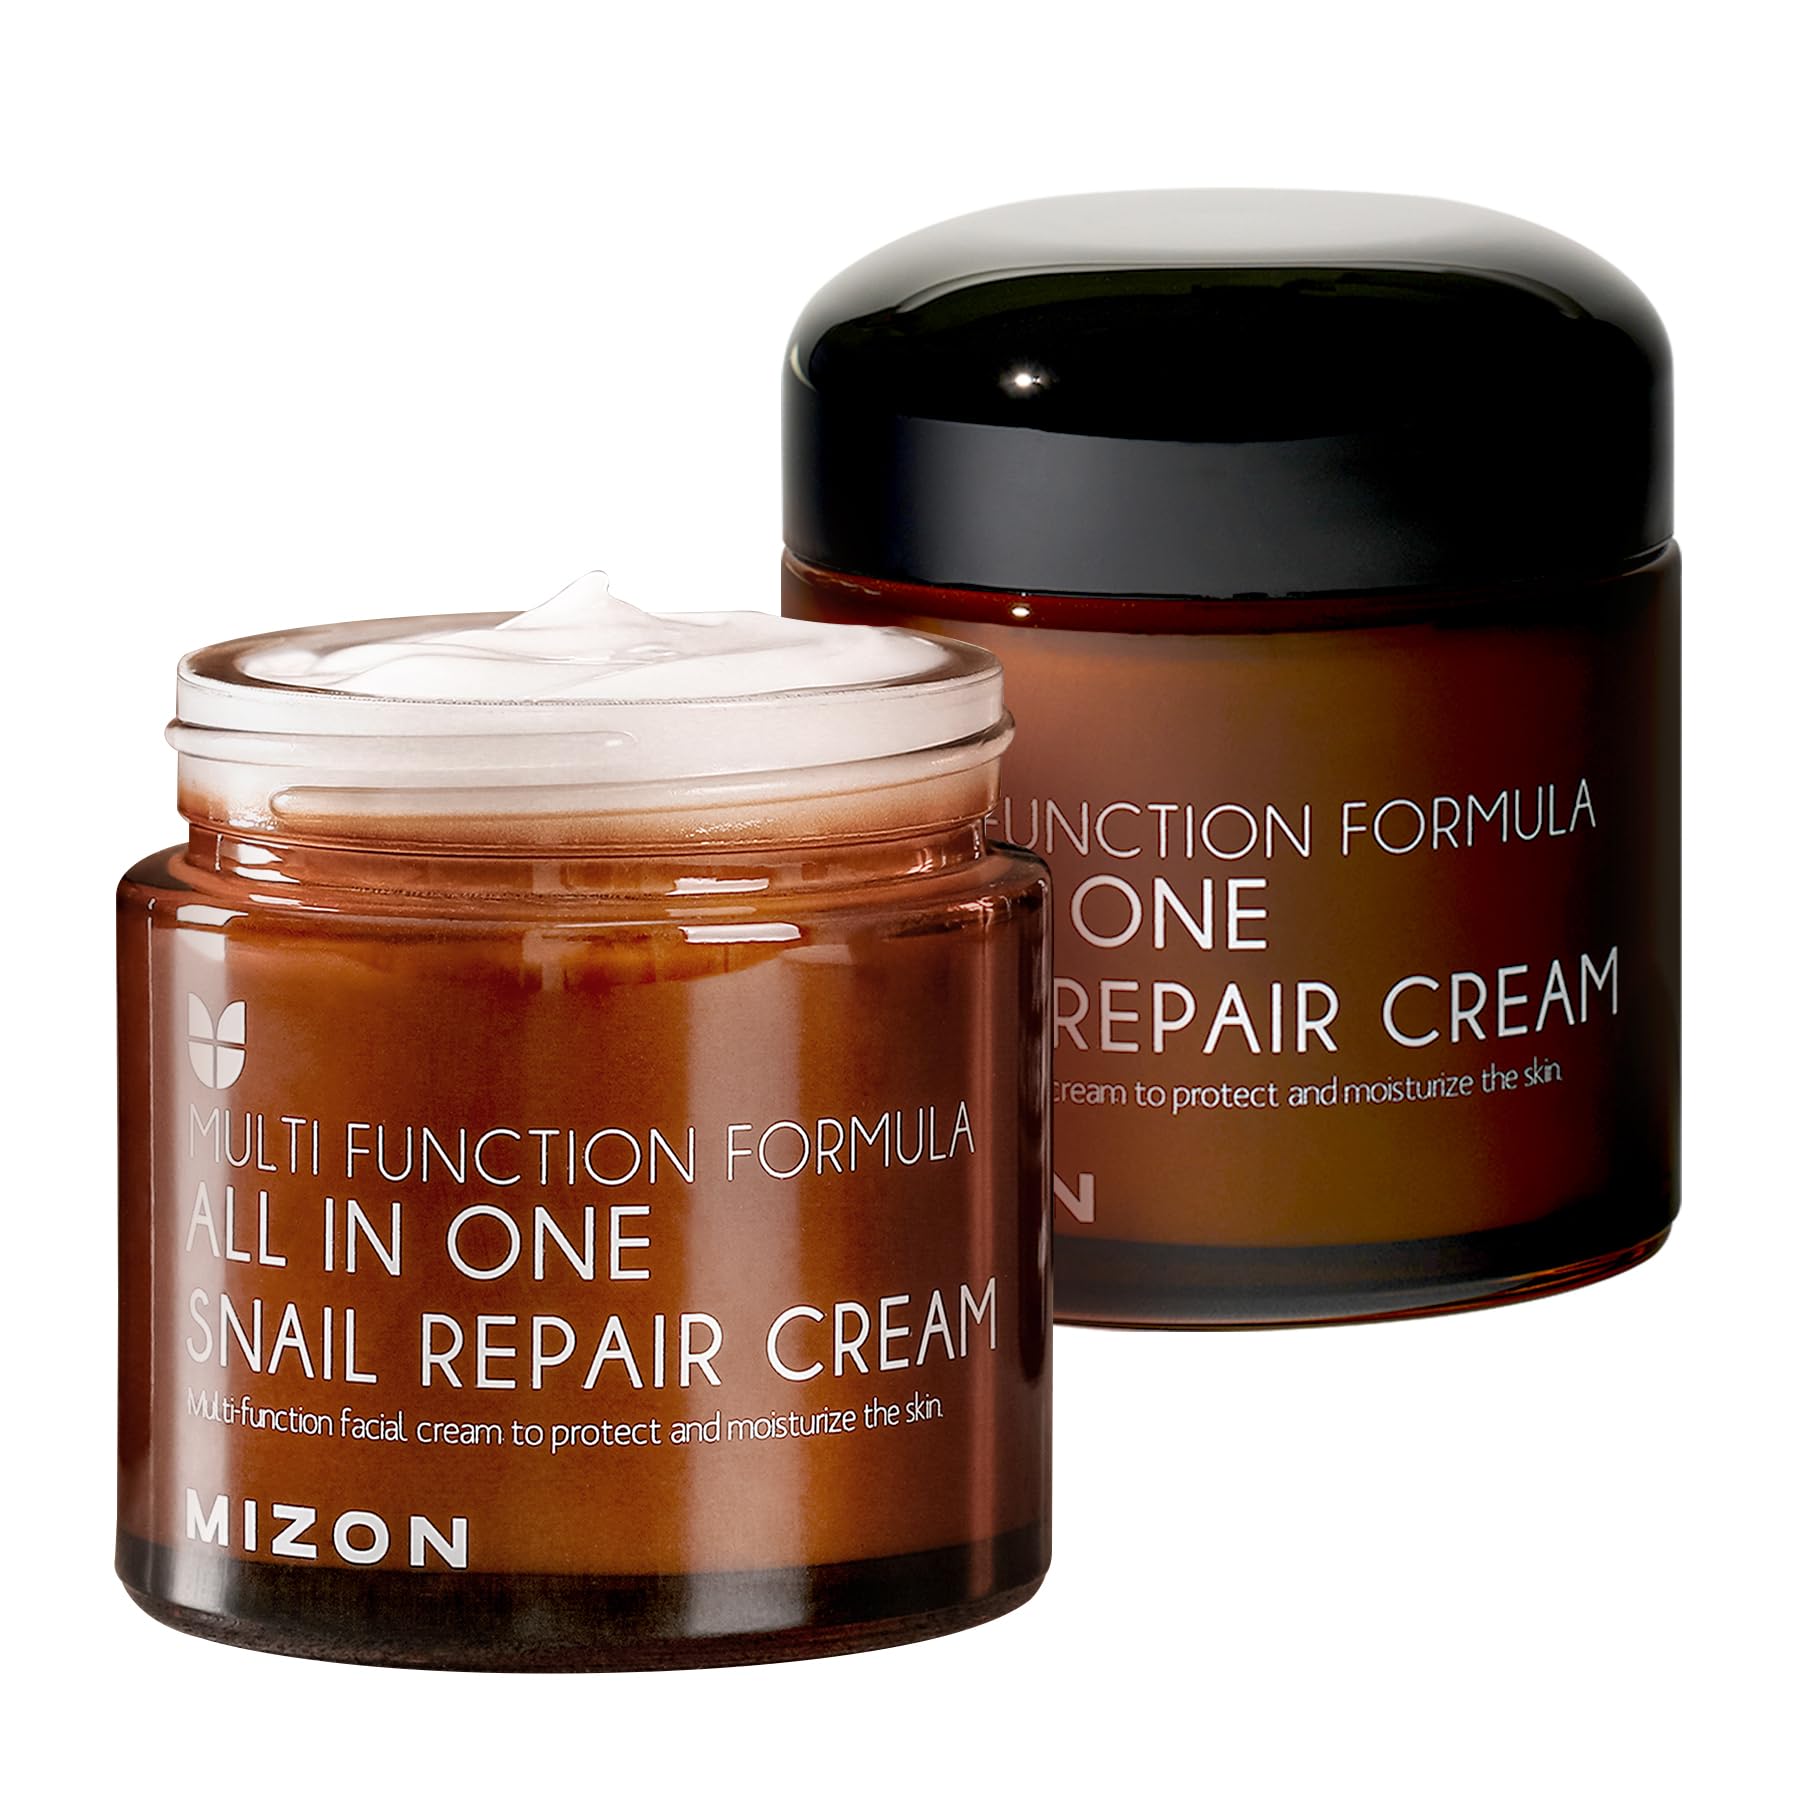 MIZON Snail Repair Cream, Face Moisturizer with Snail Mucin Extract, All in One Snail Repair Cream, Recovery Cream, Korean Skincare, Wrinkle & Blemish Care (2.53 Fl Oz Pack of 1)